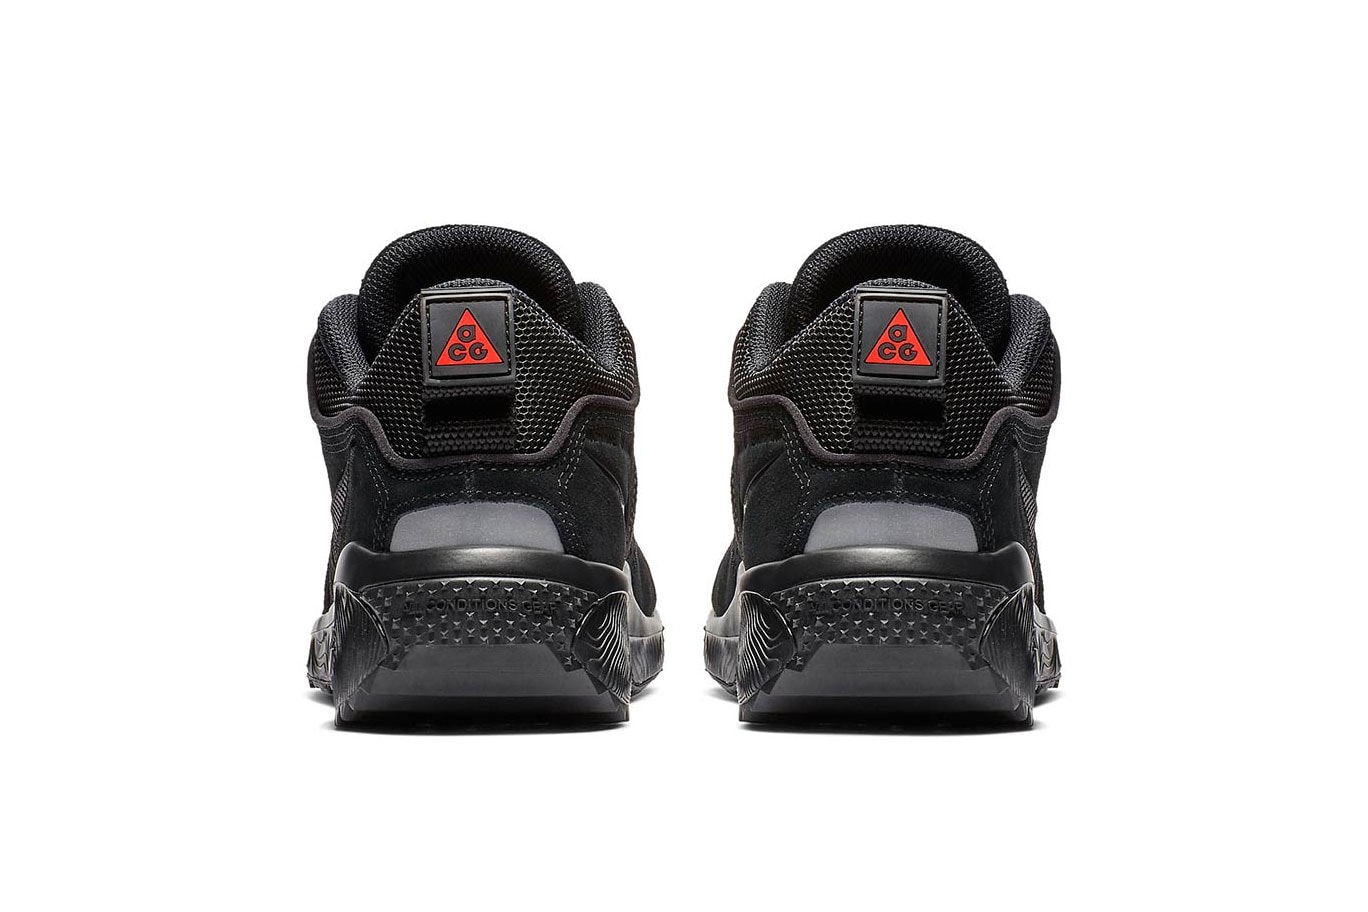 Nike ACG Dog Mountain “Triple Black” Release red laces date price 2018 info sneaker colorway buy online 